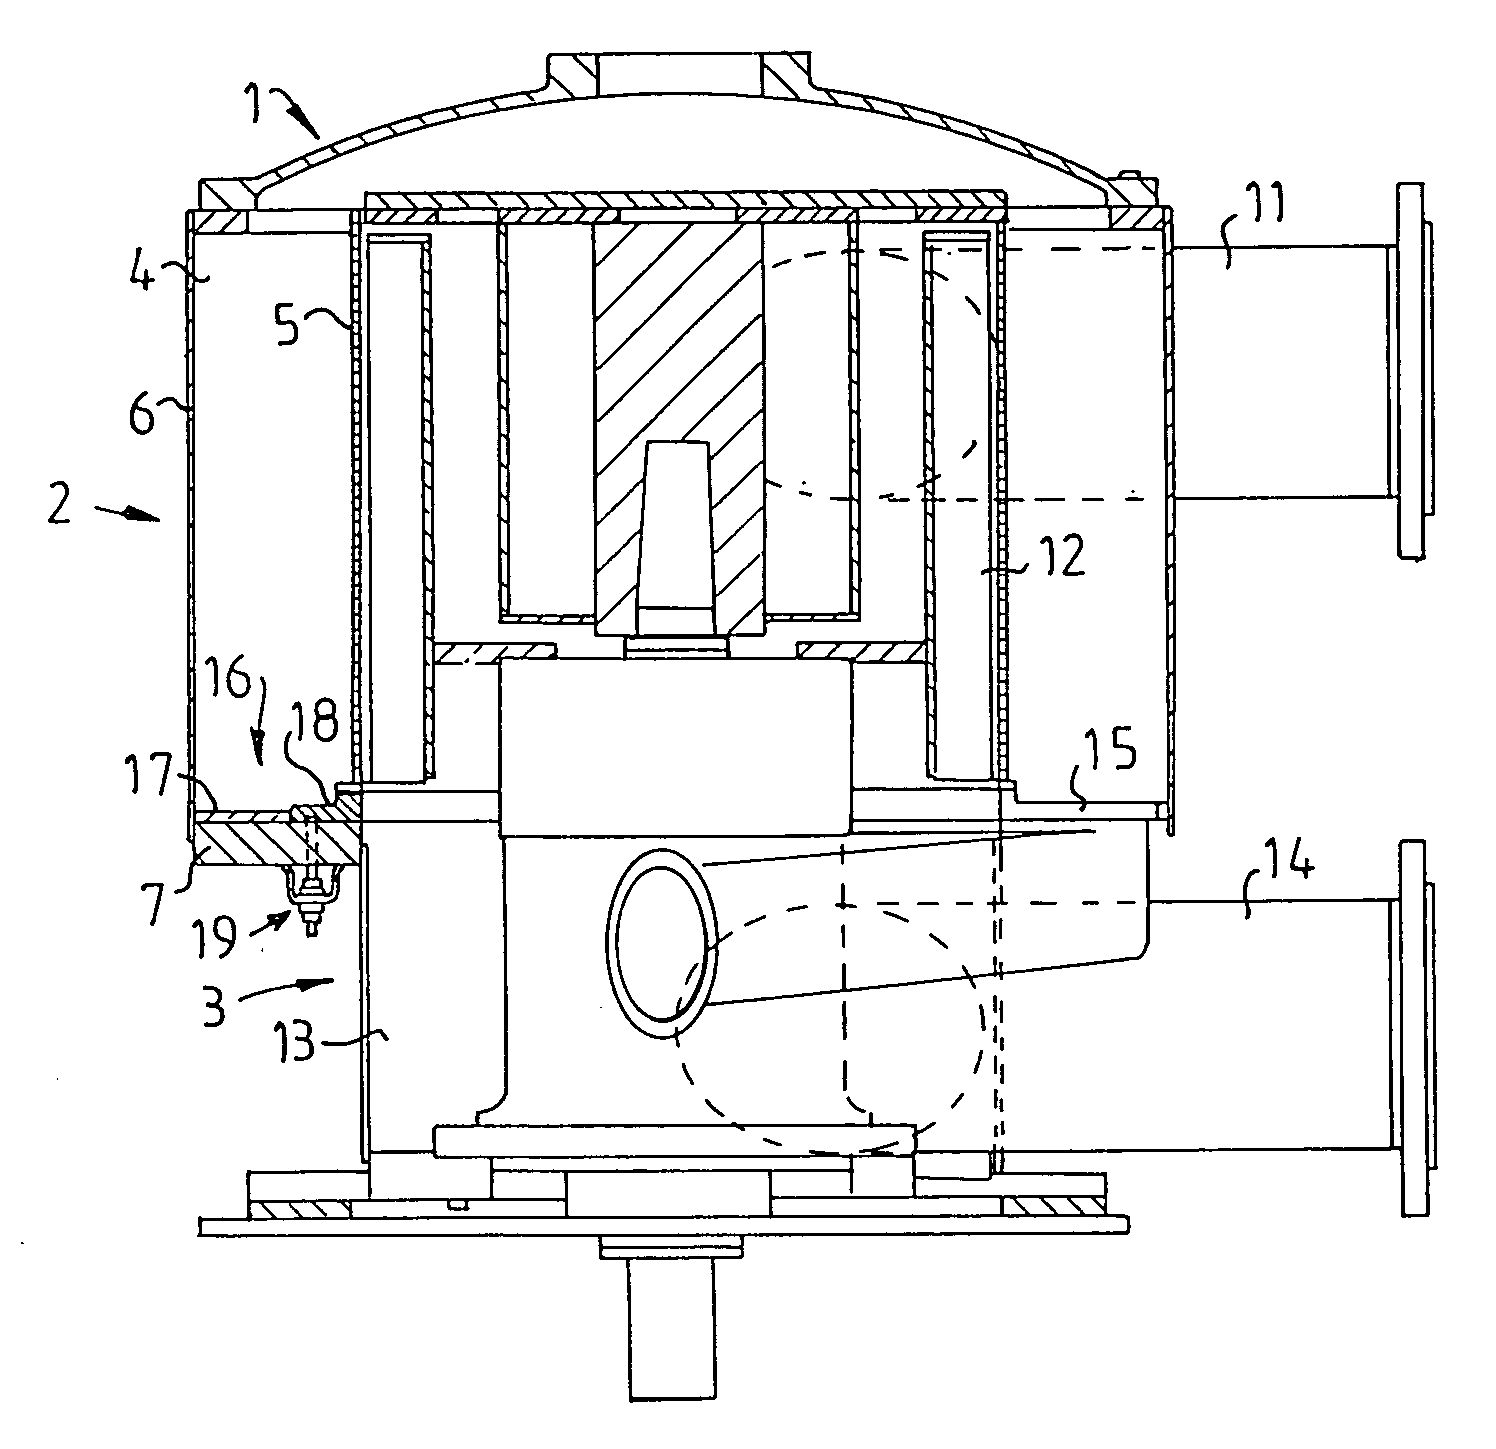 Screening apparatus with slot ring moveable in axial direction